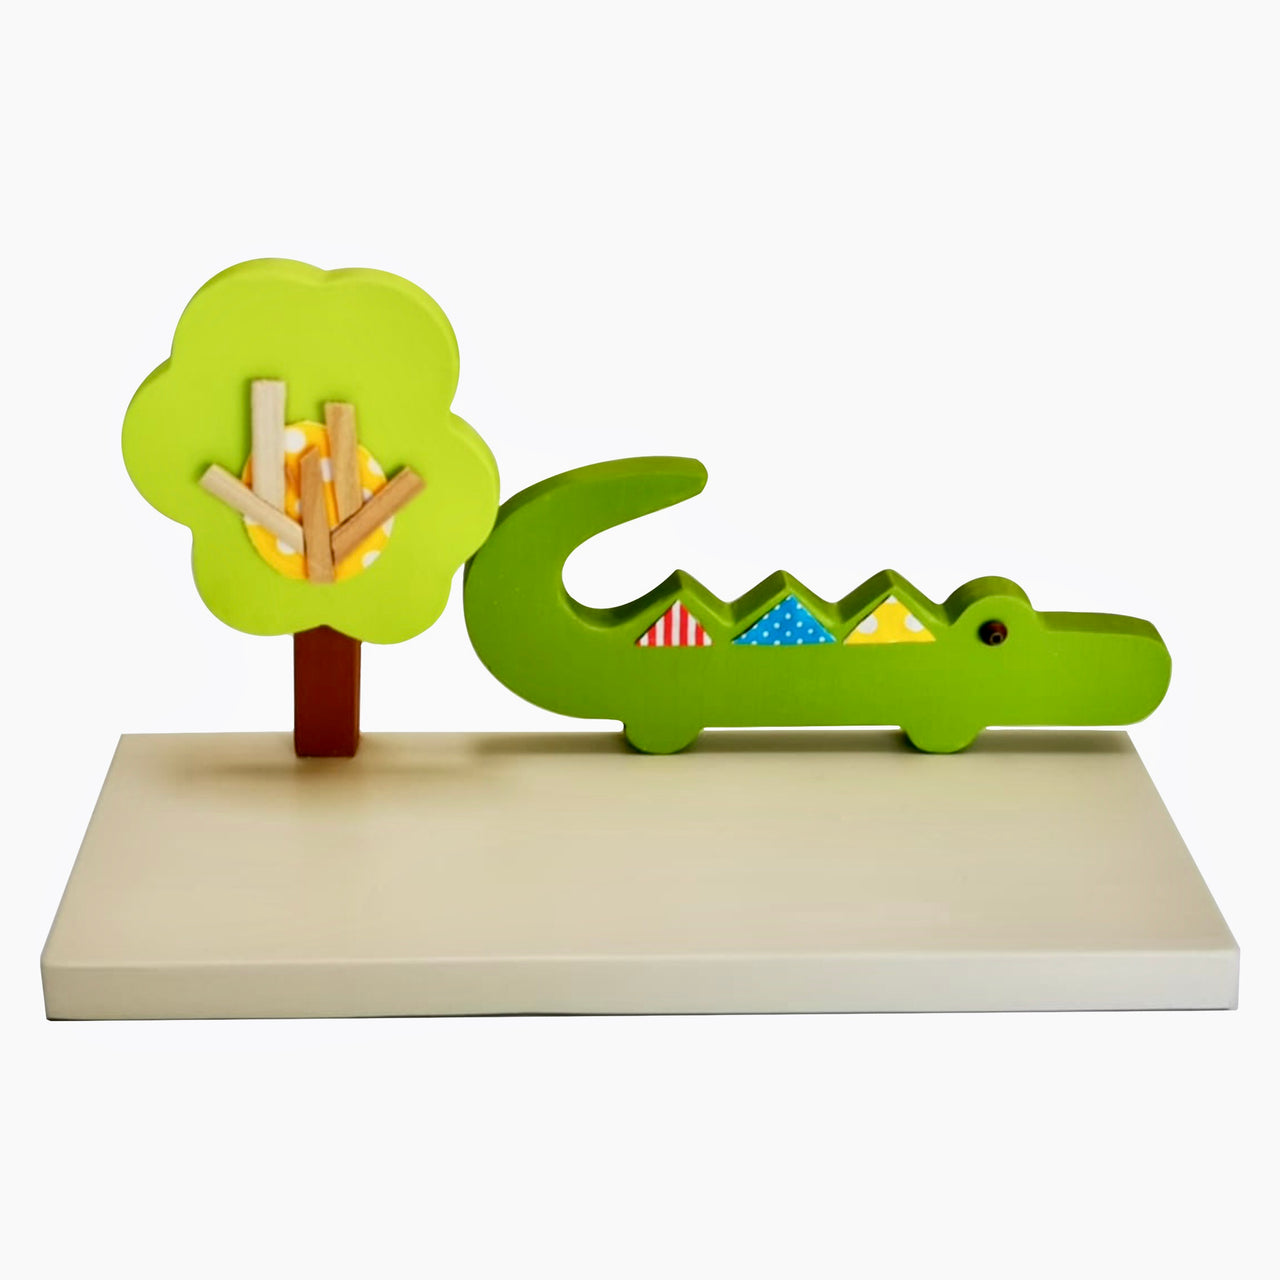 Designed and hand-crafted in Italy, this display shelf with a neutral painted wooden base and crocodile design will bring colour and imagination to your child's bedroom.  Creatively constructed from wood and layered fabric, the vibrant crocodile design is stunning. A quirky and practical way to display items in your child's bedroom. Matches similar products on Rooms for Rascals. 